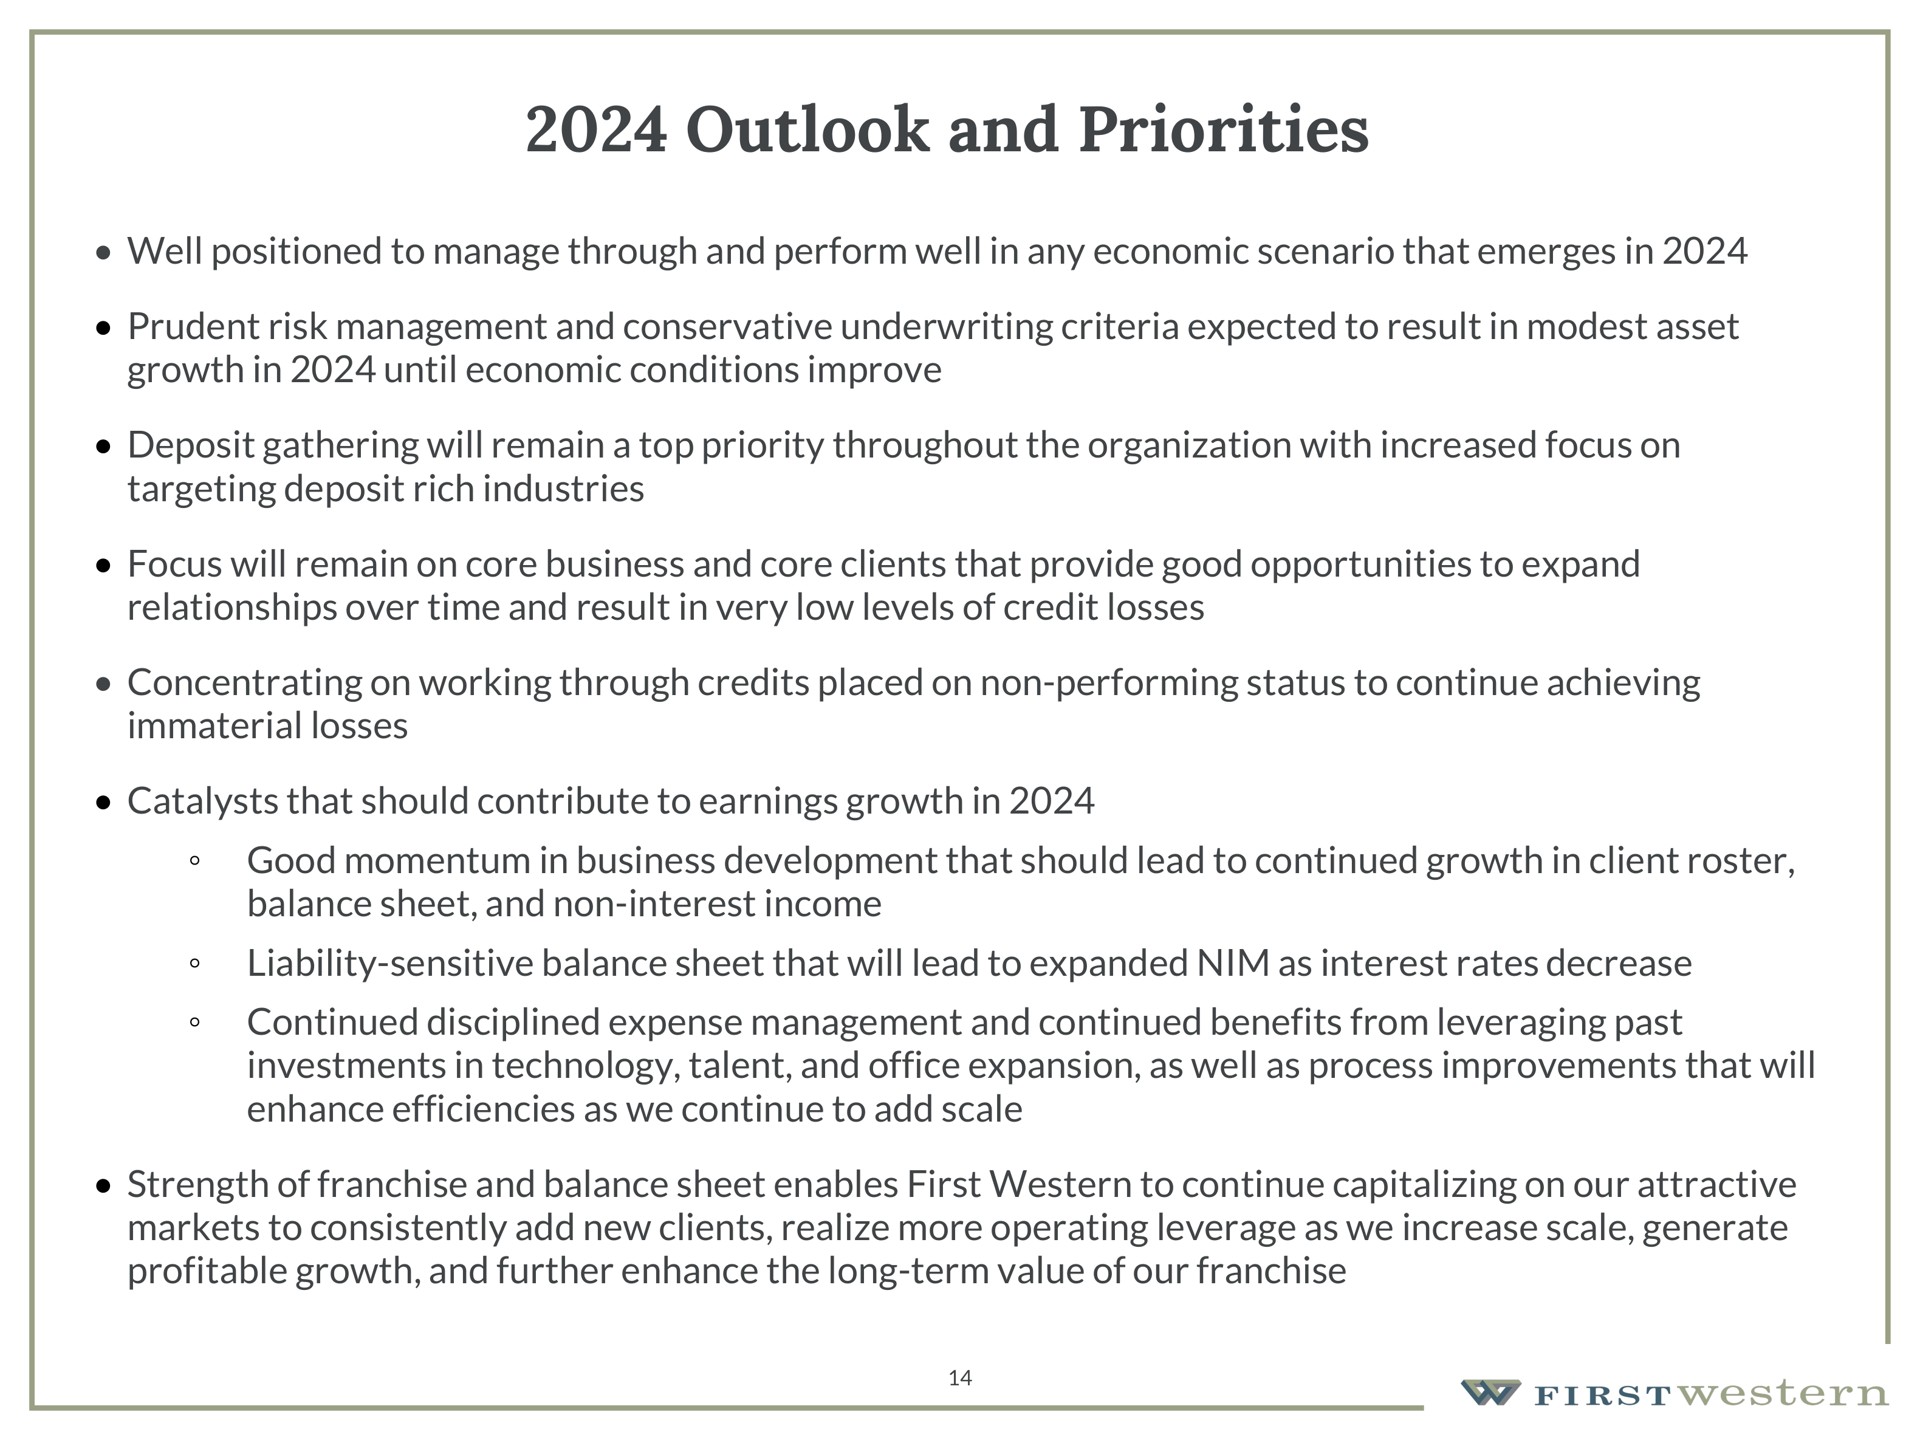 outlook and priorities well positioned to manage through and perform well in any economic scenario that emerges in prudent risk management and conservative underwriting criteria expected to result in modest asset growth in until economic conditions improve deposit gathering will remain a top priority throughout the organization with increased focus on targeting deposit rich industries focus will remain on core business and core clients that provide good opportunities to expand relationships over time and result in very low levels of credit losses concentrating on working through credits placed on non performing status to continue achieving immaterial losses catalysts that should contribute to earnings growth in good momentum in business development that should lead to continued growth in client roster balance sheet and non interest income liability sensitive balance sheet that will lead to expanded nim as interest rates decrease continued disciplined expense management and continued benefits from leveraging past investments in technology talent and office expansion as well as process improvements that will enhance efficiencies as we continue to add scale strength of franchise and balance sheet enables first western to continue capitalizing on our attractive markets to consistently add new clients realize more operating leverage as we increase scale generate profitable growth and further enhance the long term value of our franchise | First Western Financial